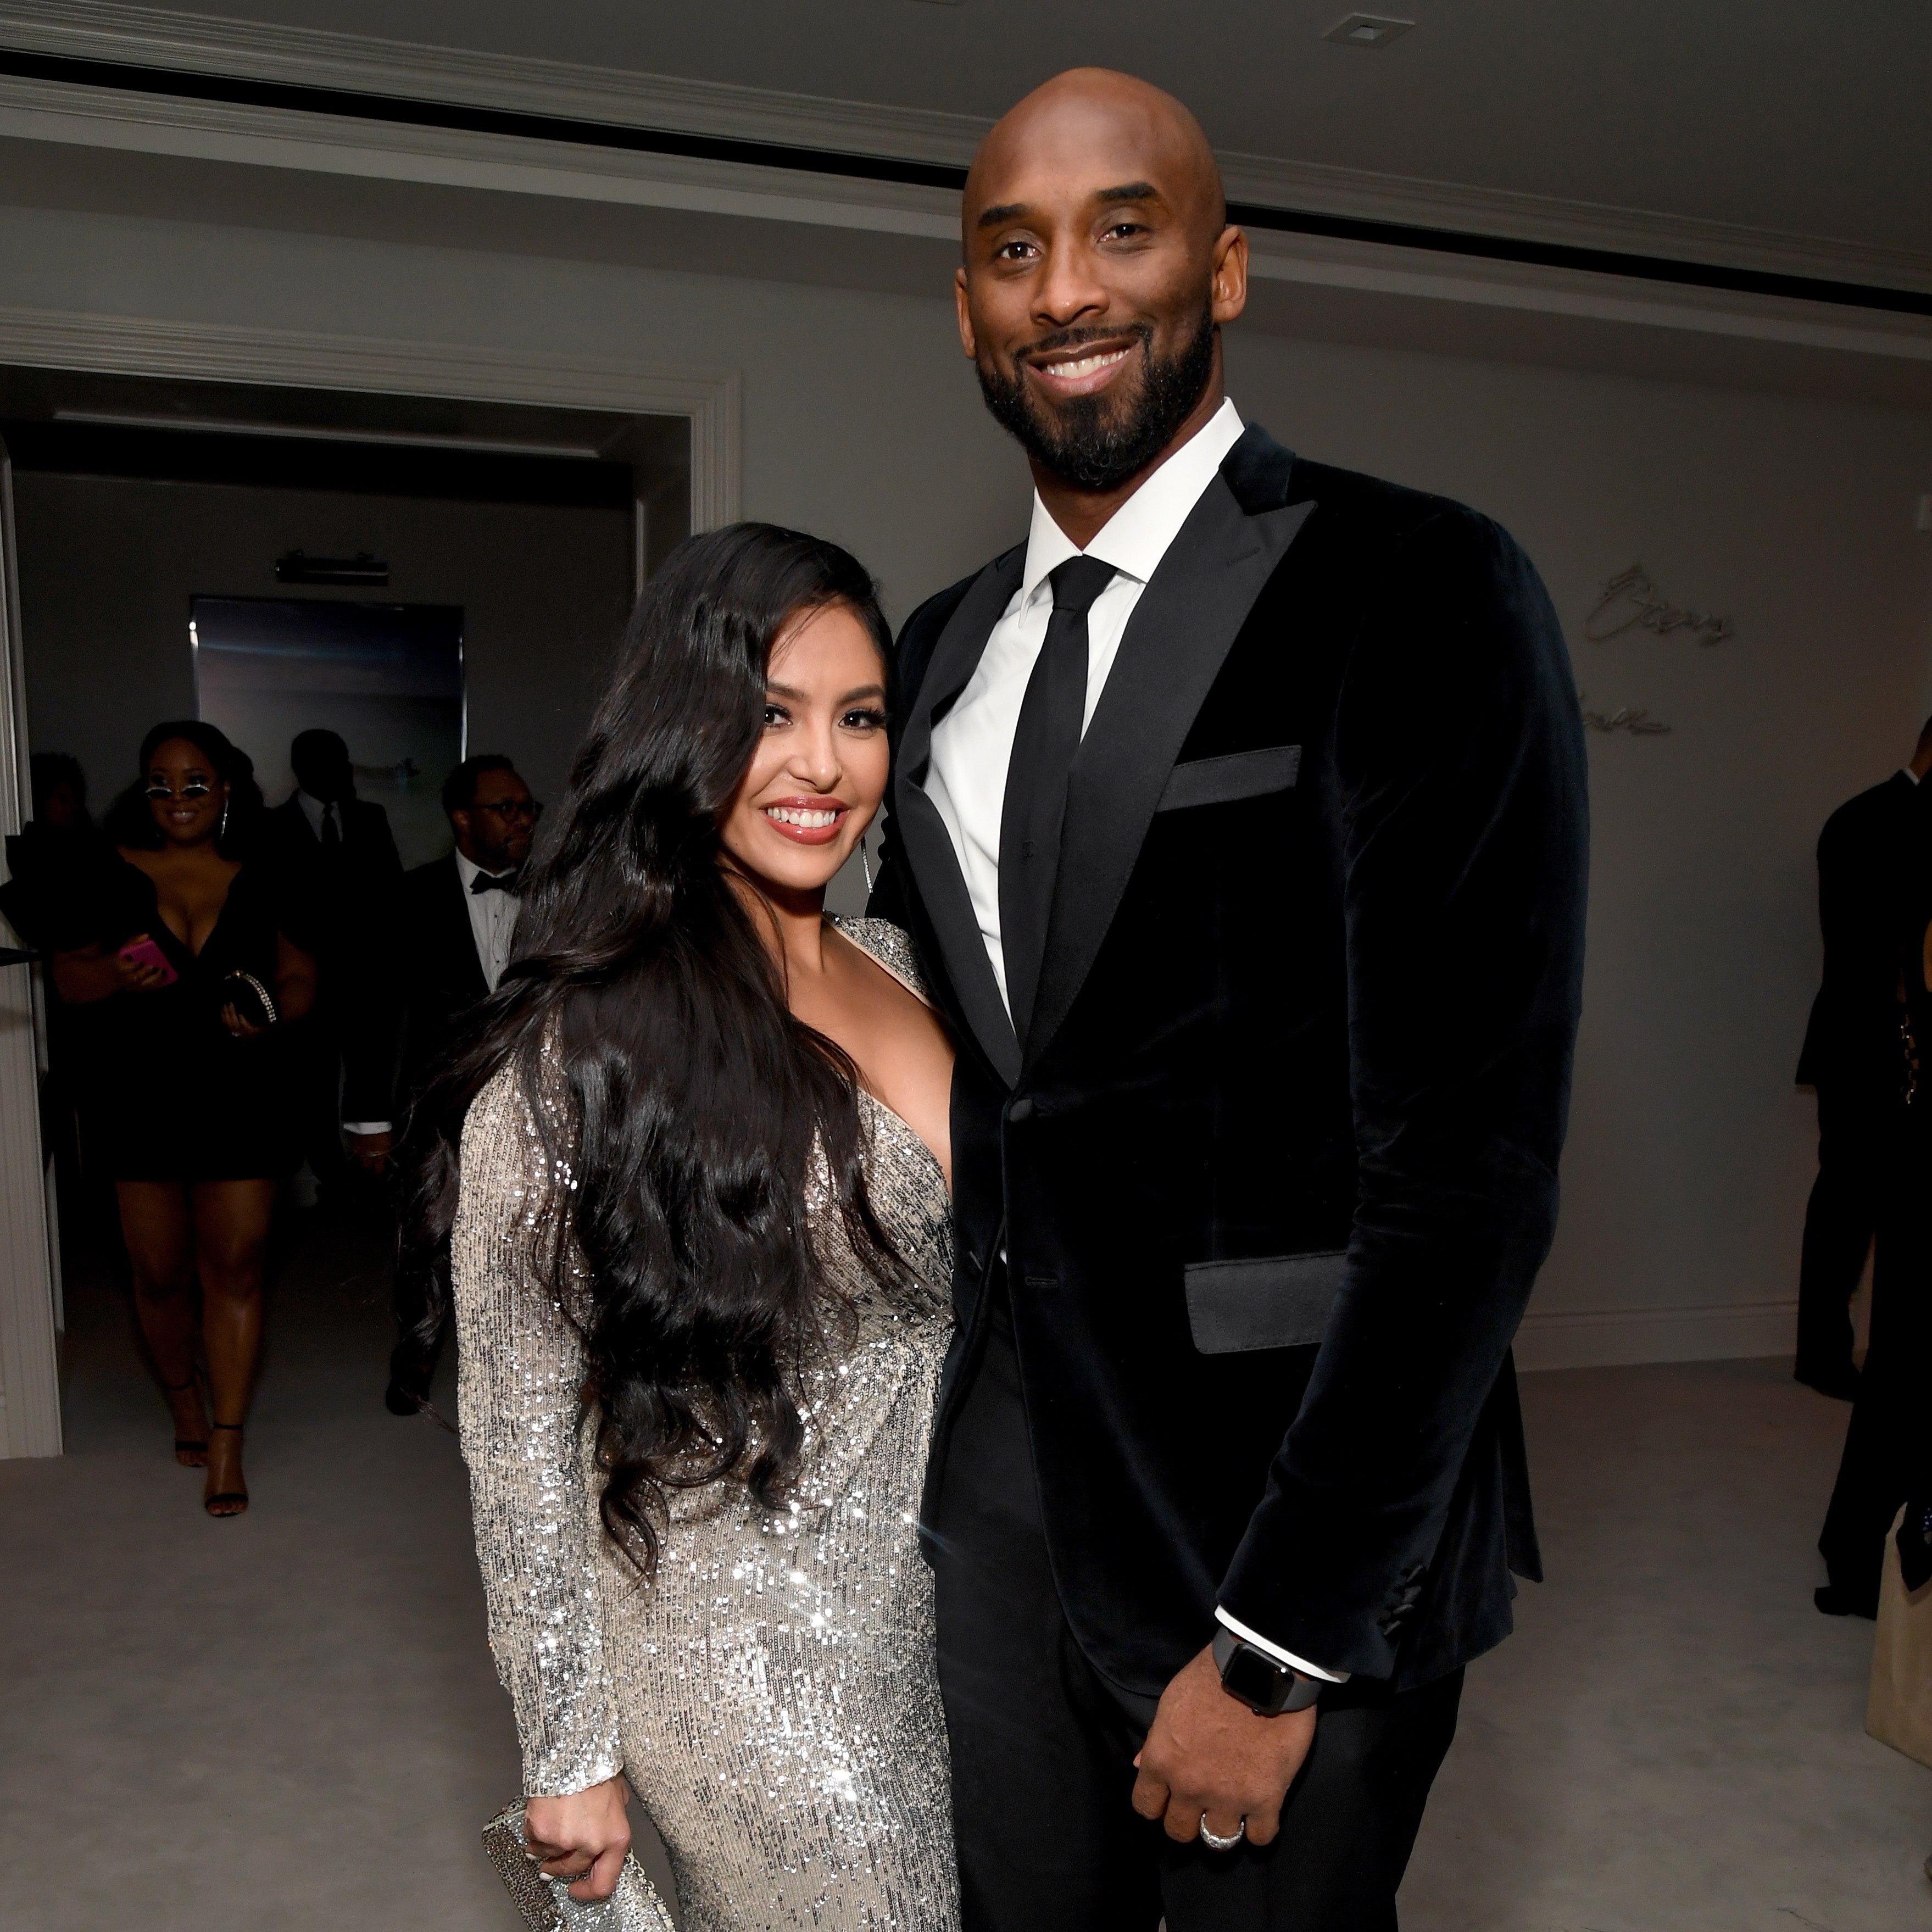 Beyonce, J. Lo and More Honor Kobe Bryant, Gianna With Fashion